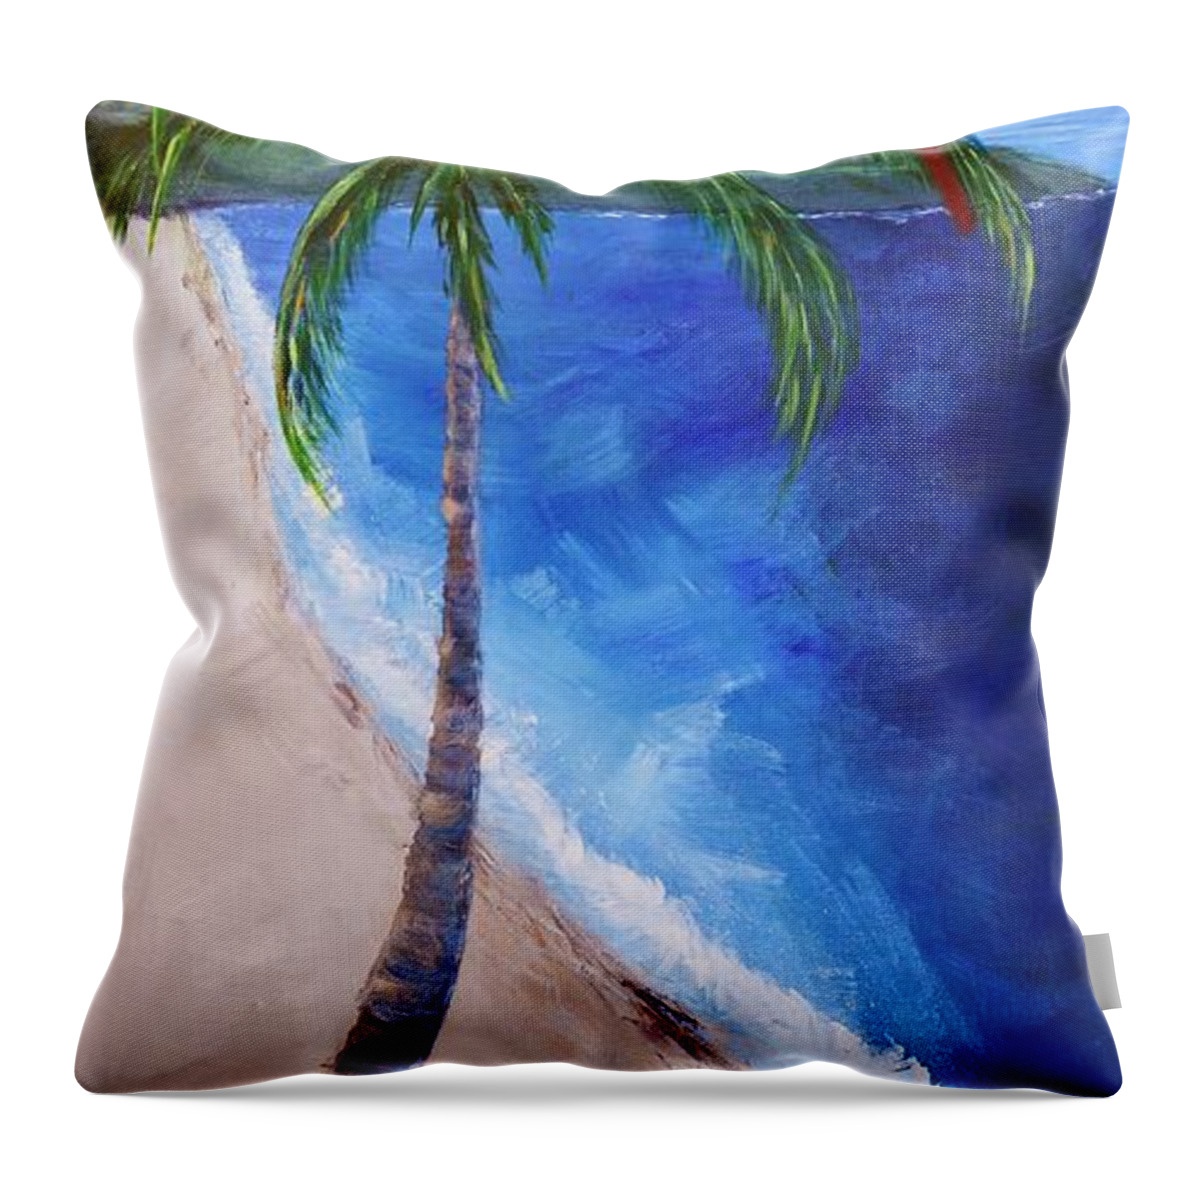 Sand Throw Pillow featuring the painting Beautiful Palos Verdes Palm and Parrots by Jamie Frier